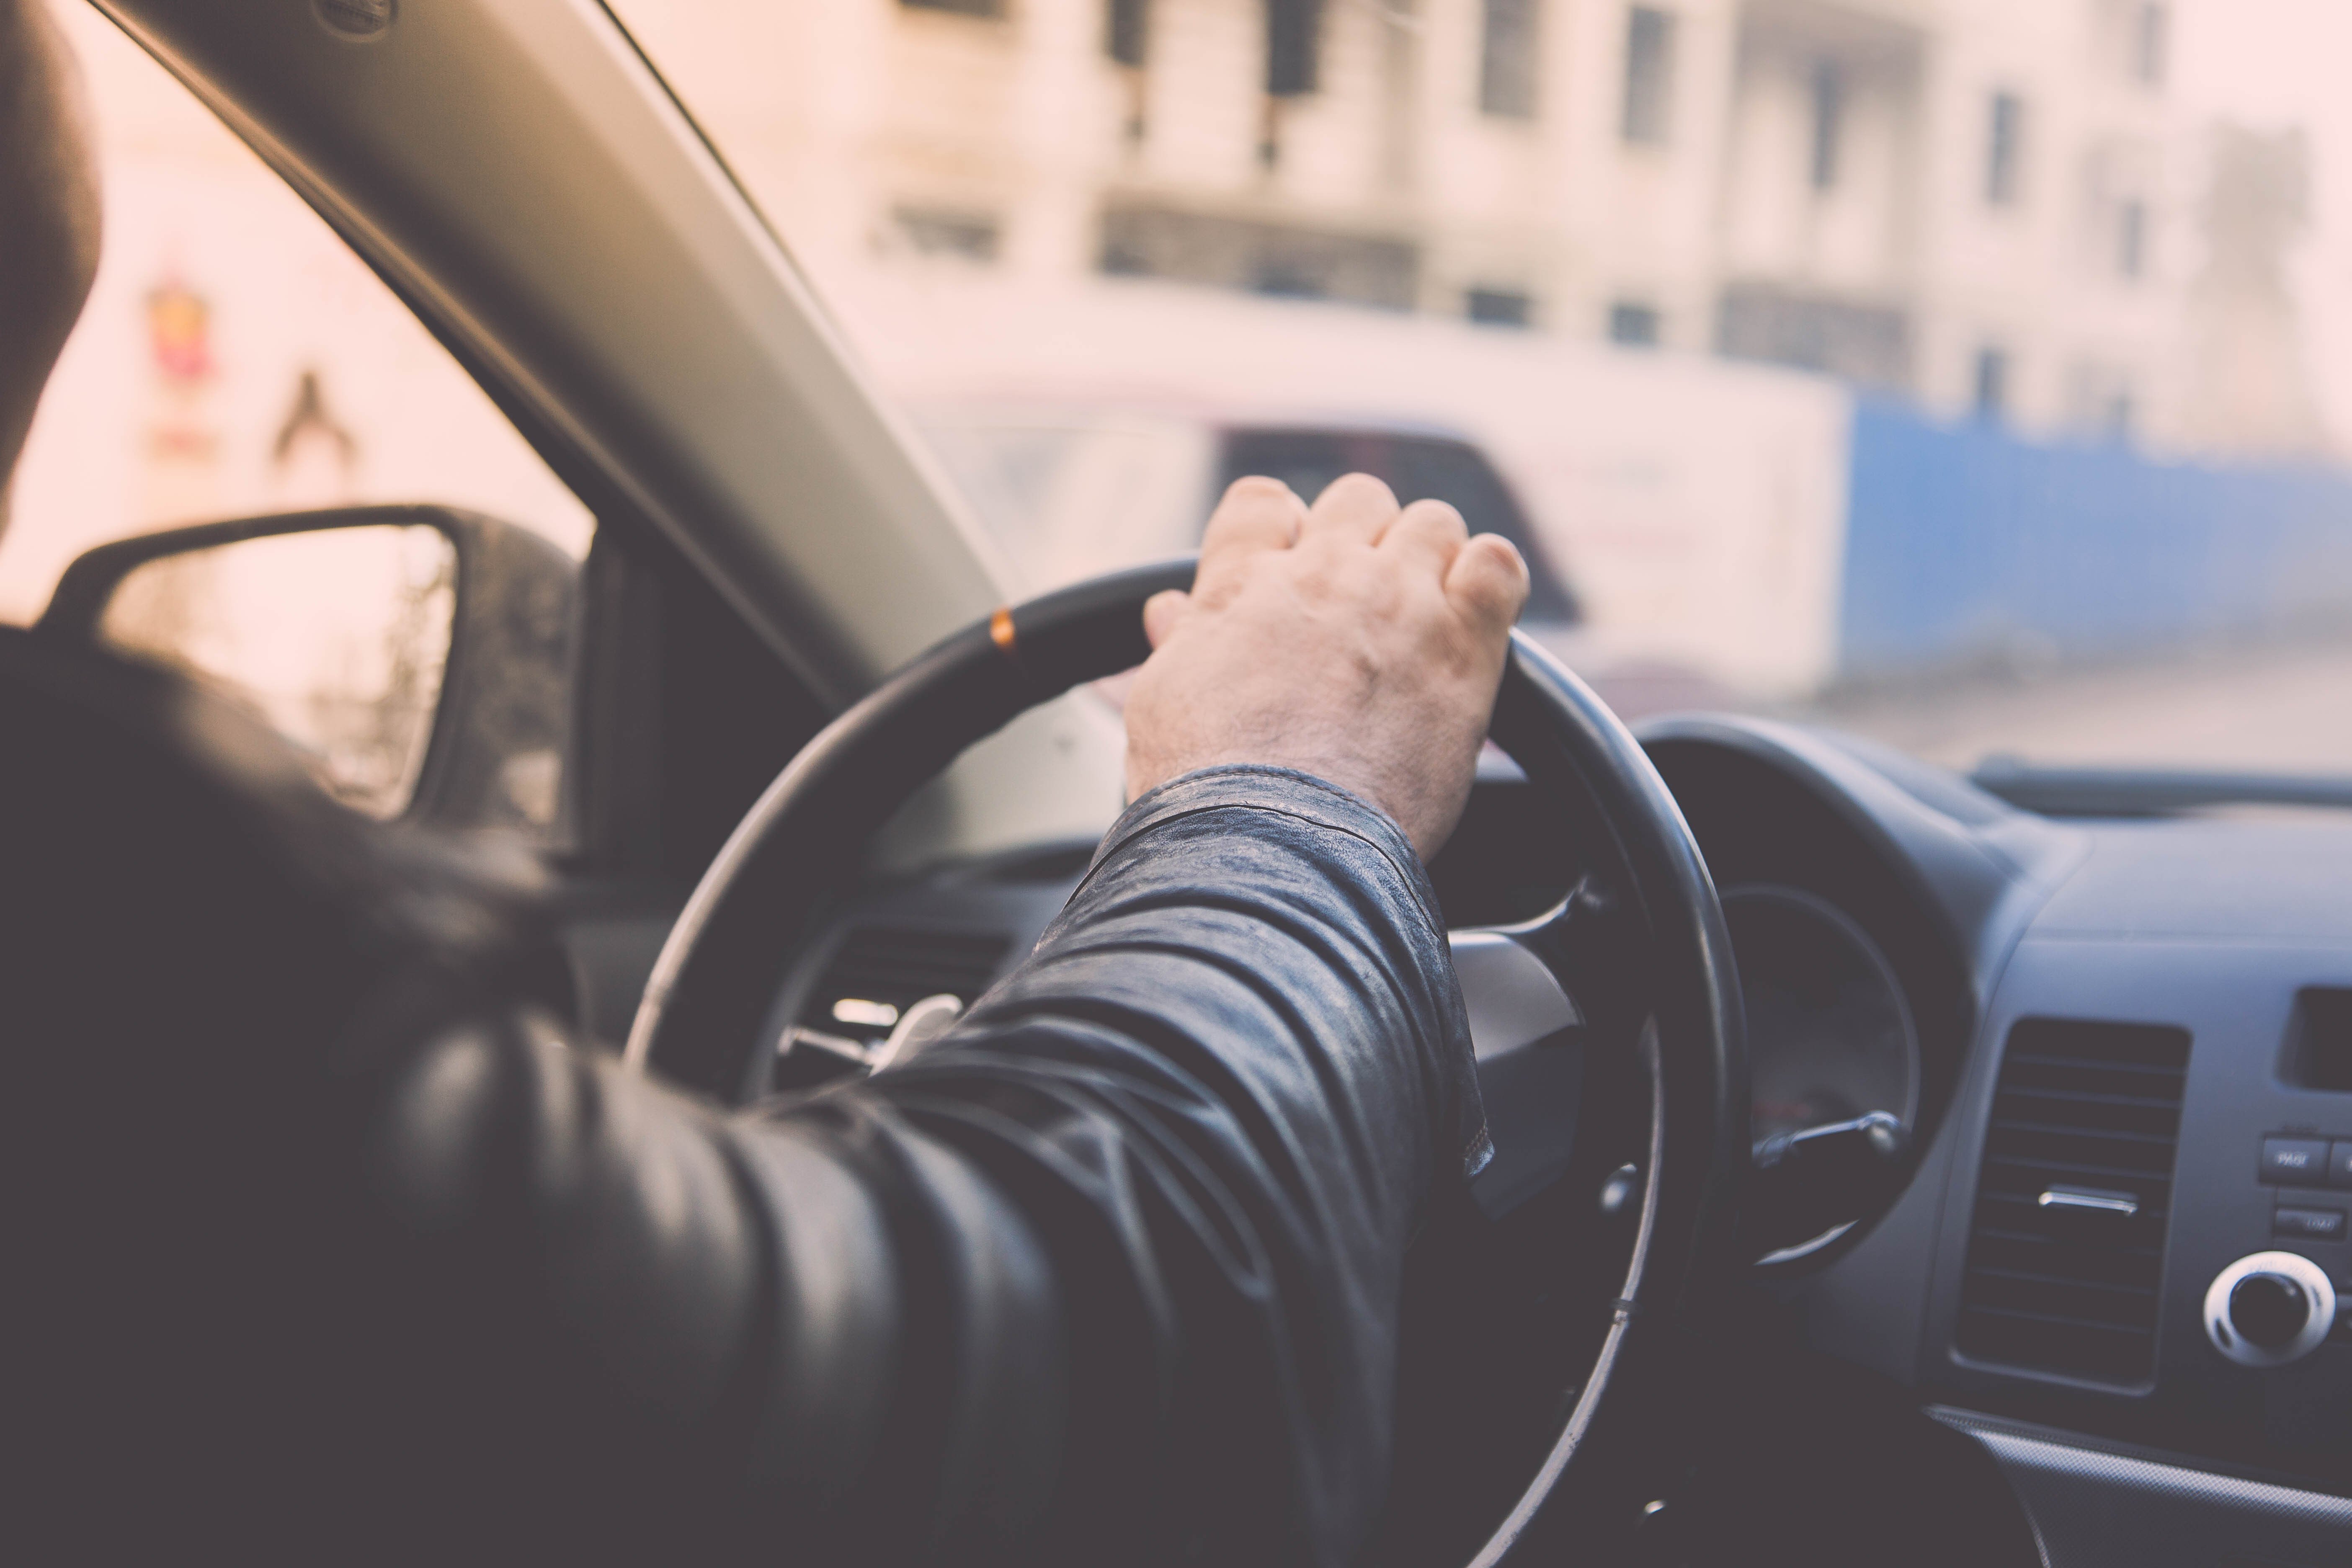 Taxi driver driving car, hand on steering wheel, looking at the road | Photo: Shutterstock.com